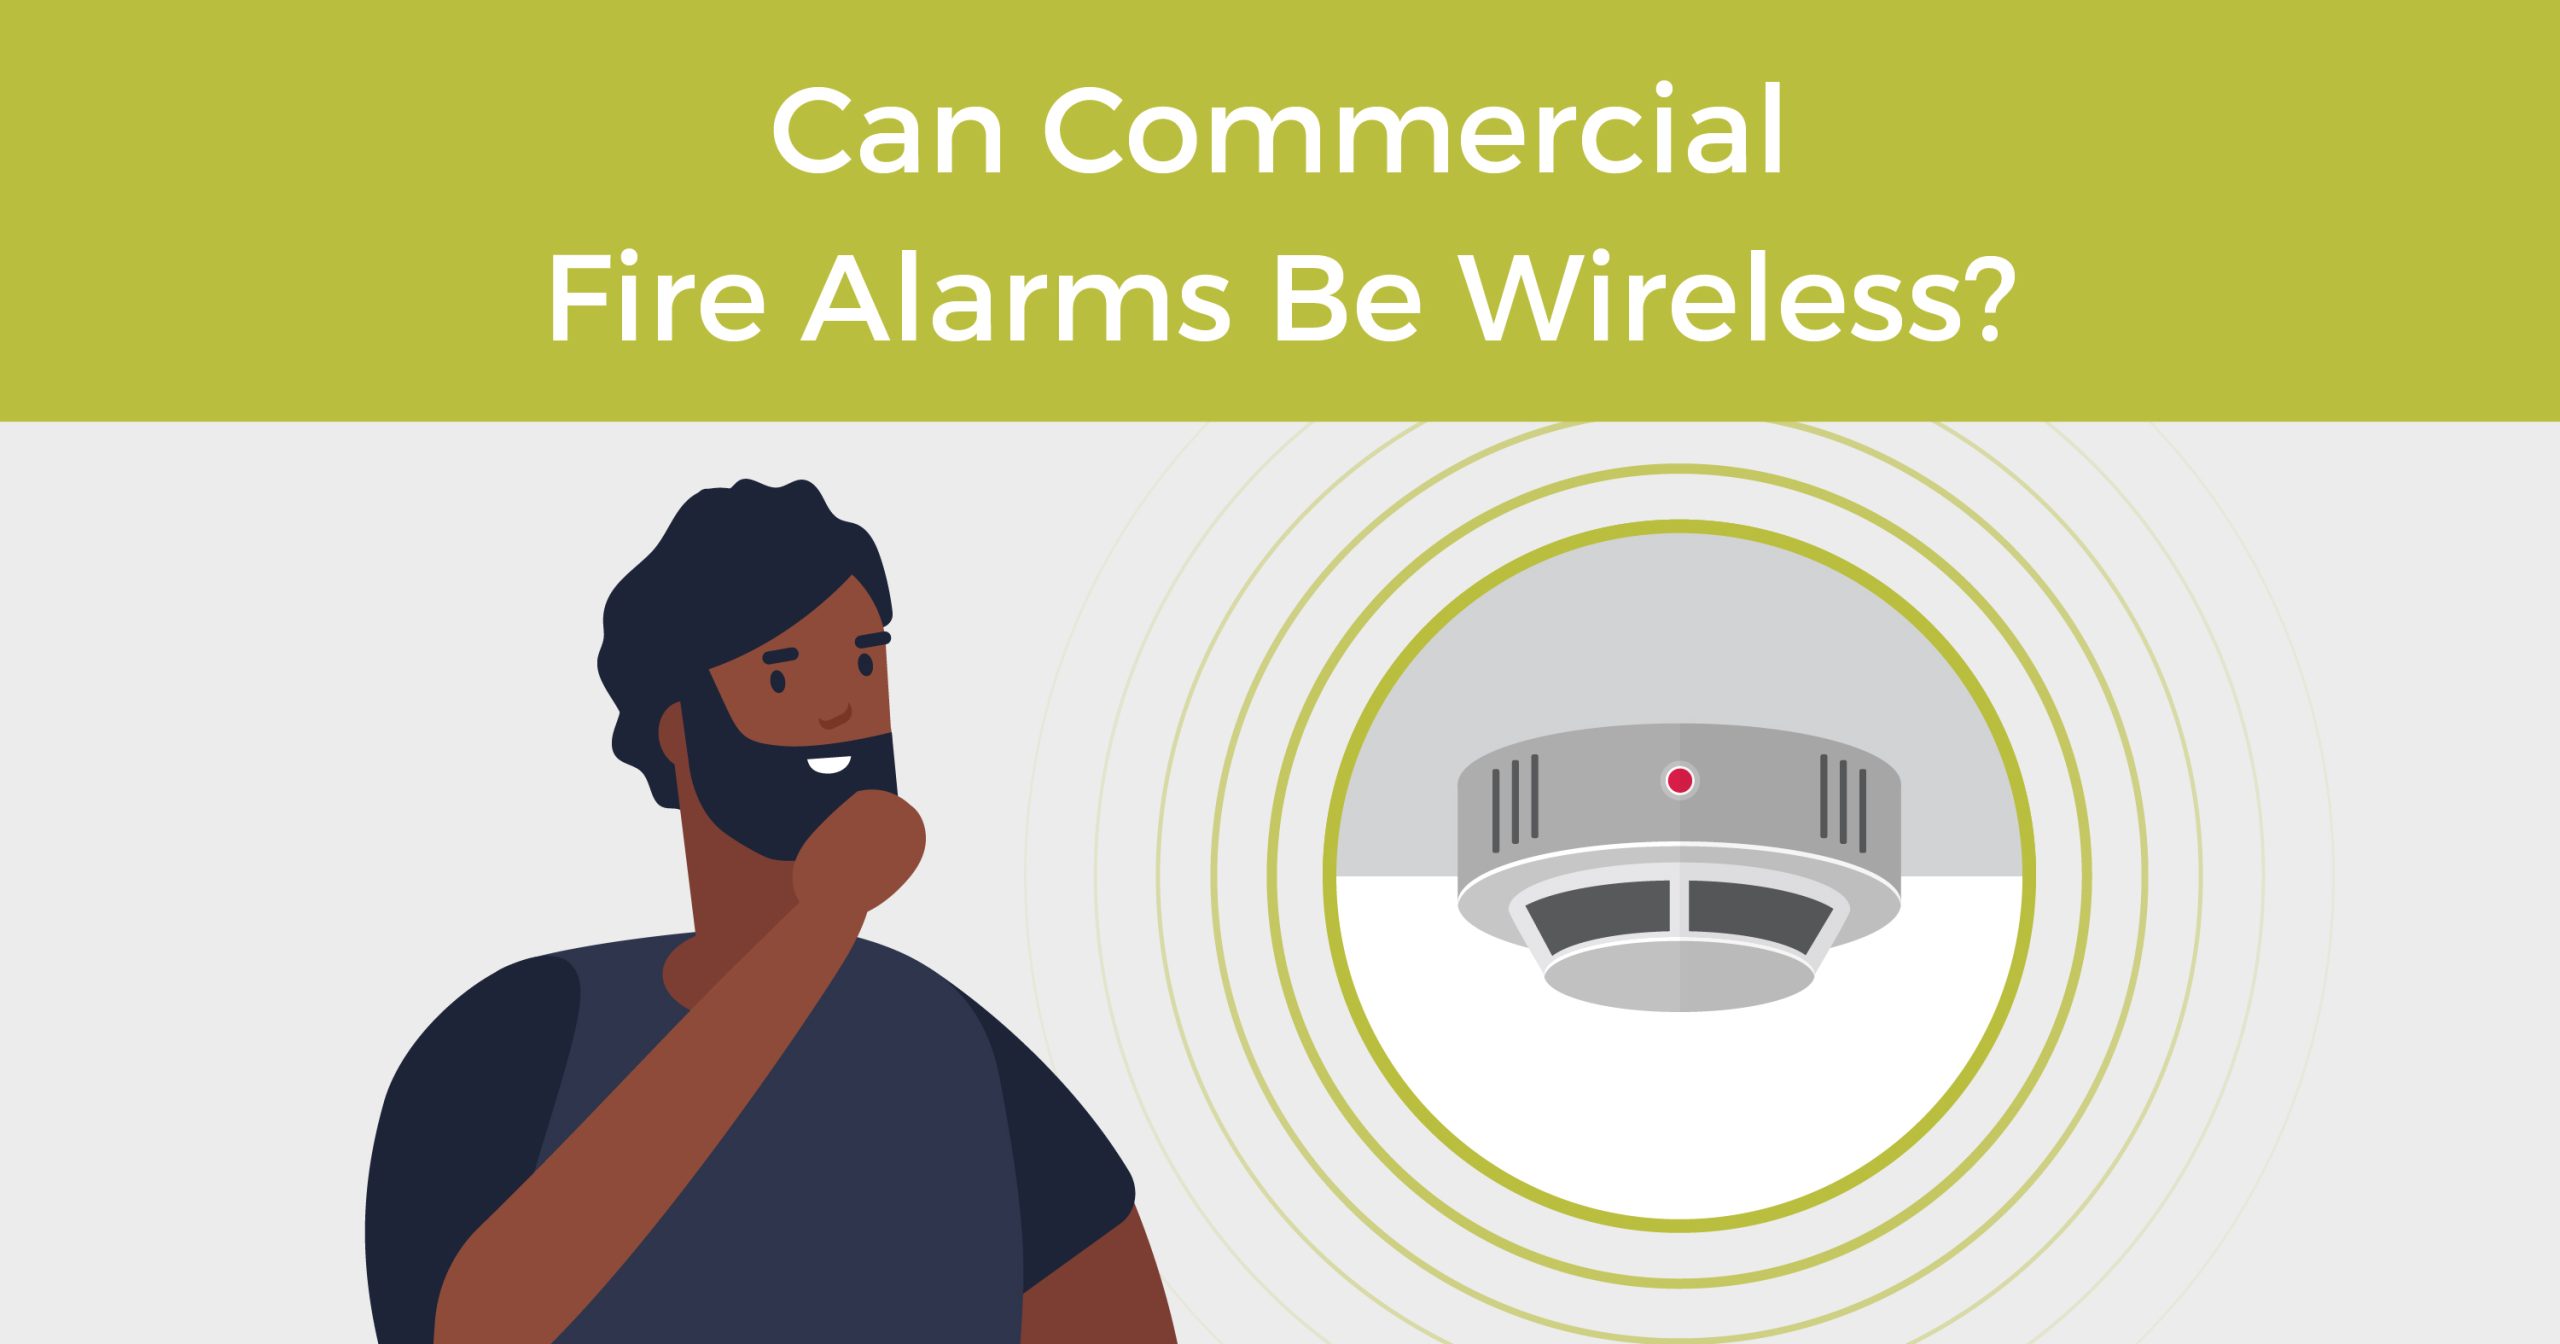 Can commercial fire alarms be wireless?